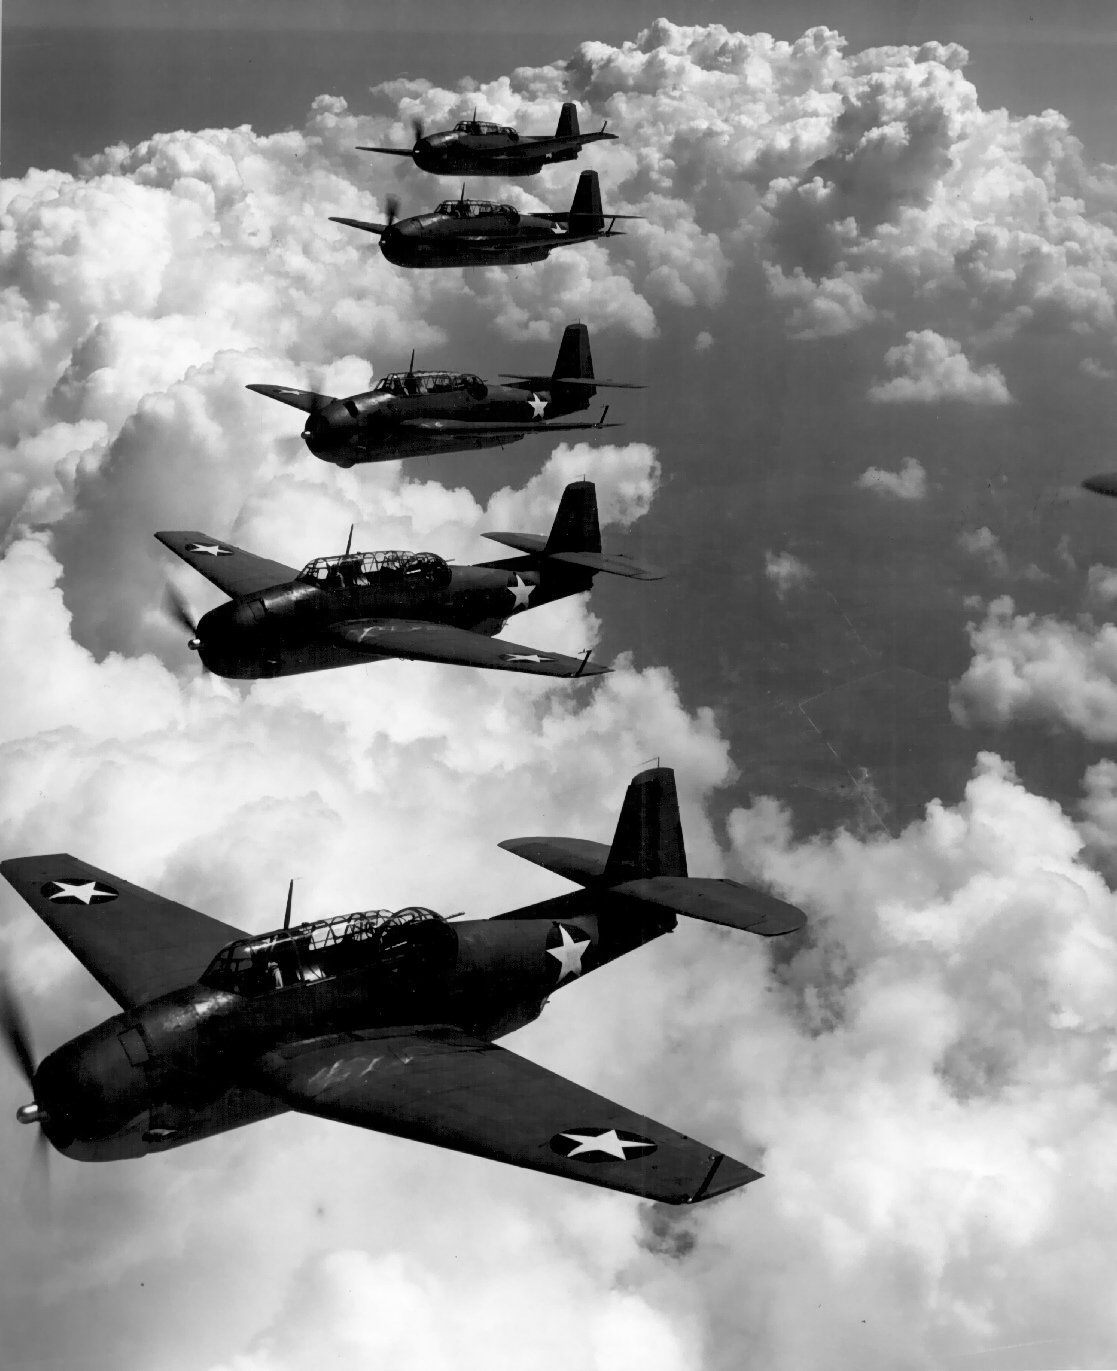 TBF_(Avengers)_flying_in_formation